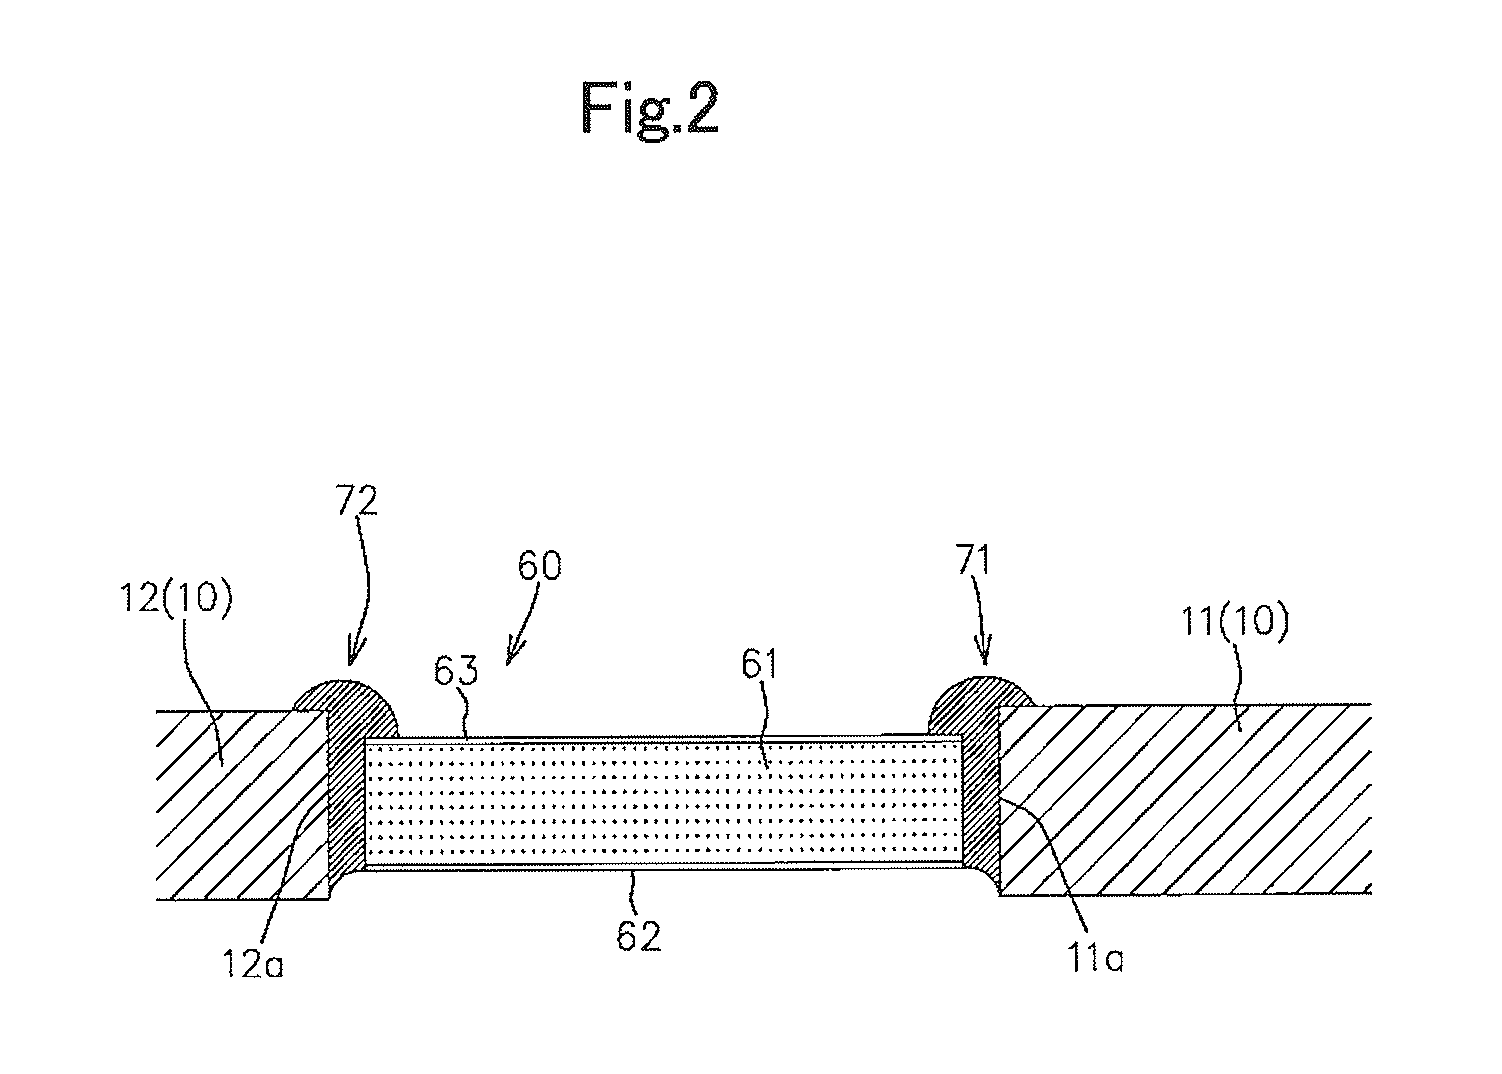 Magnetic head suspension for supporting piezoelectric elements in a non-facing manner relative to suspension structure